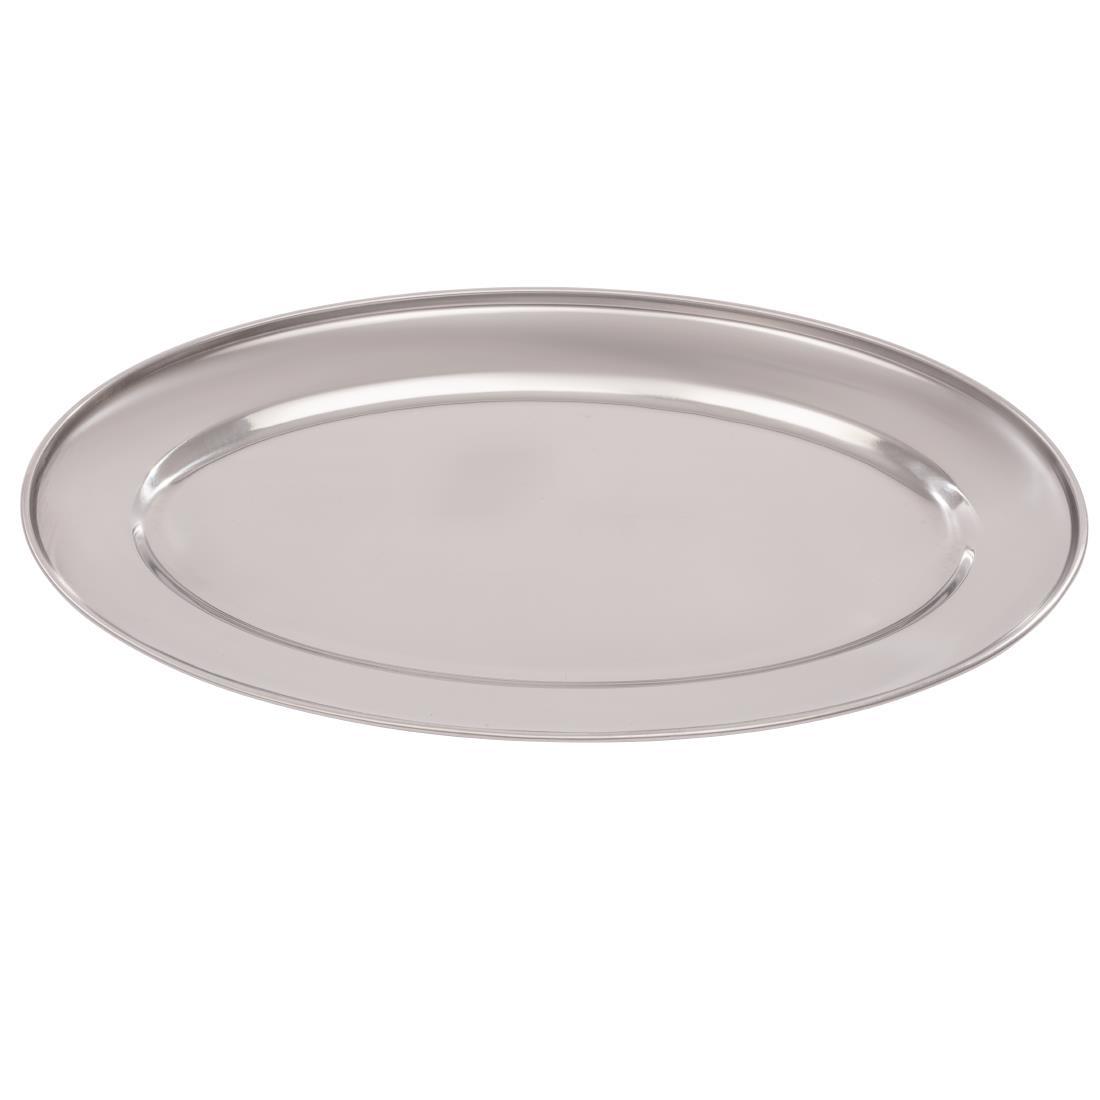 Olympia Stainless Steel Oval Serving Tray 350mm - K364  - 2